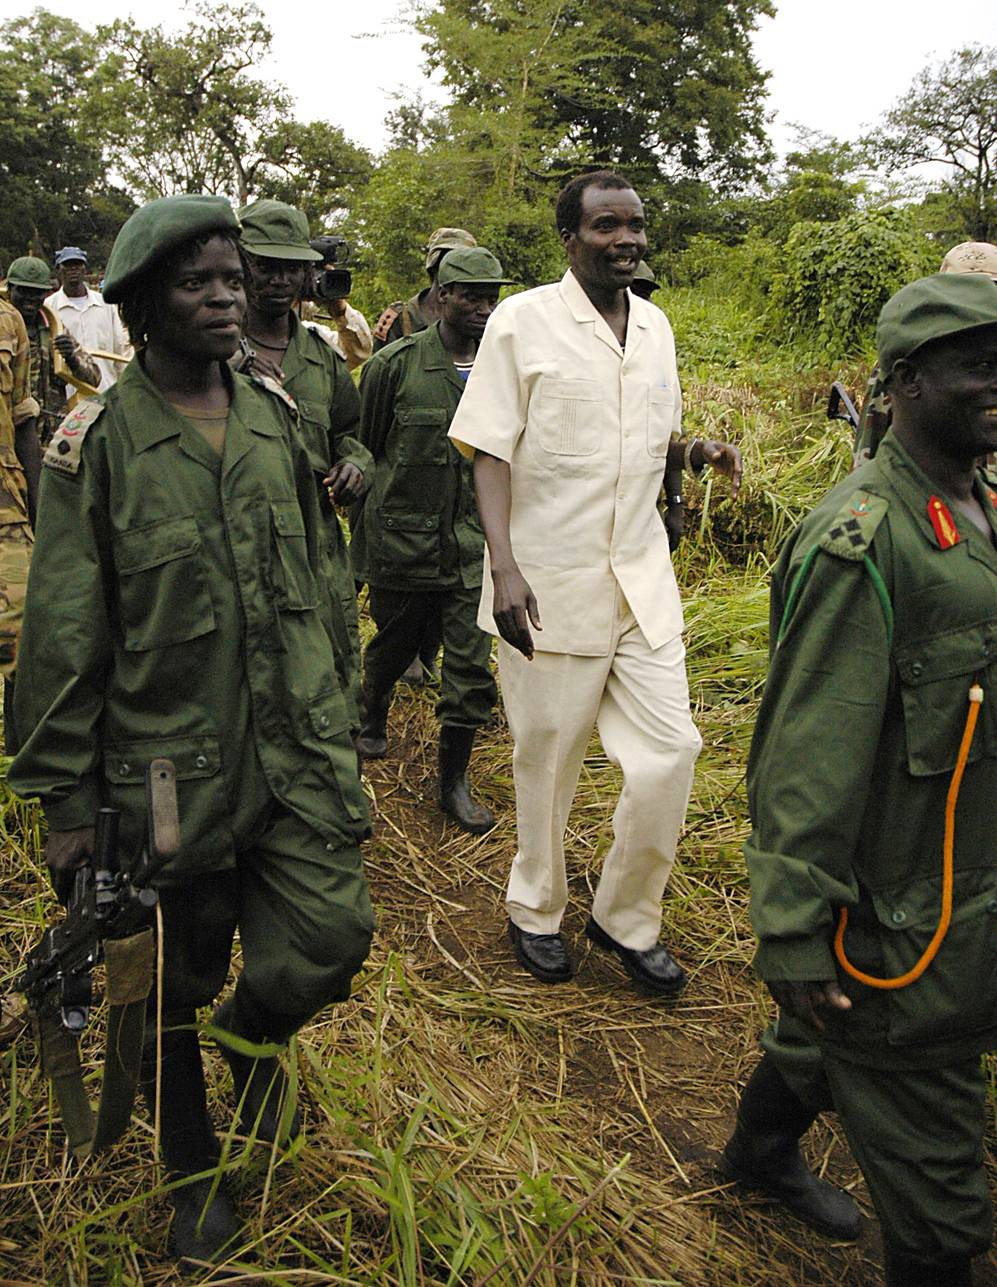 Uganda Alleges Sudan Is Supporting Joseph Kony - The Ugandan army began this week pointing a finger at already embattled Sudan with allegations that the country’s government is supporting and supplying Joseph Kony’s militia group, the Lord's Resistance Army.(Photo: Adam Pletts/Getty Images)